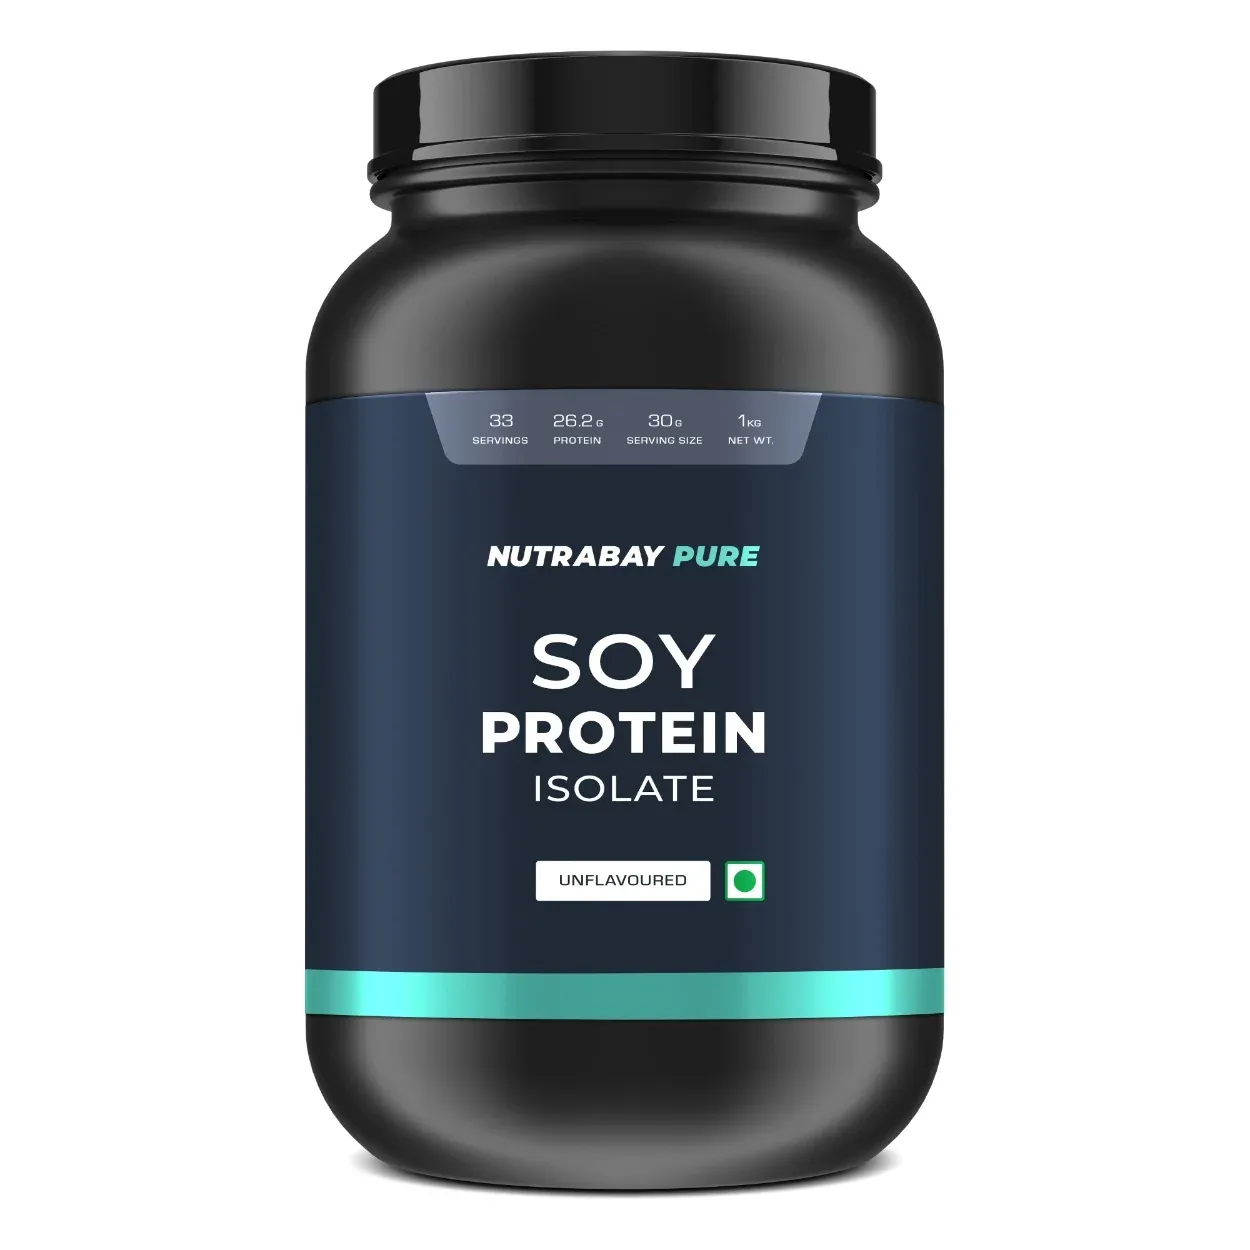 Nutrabay Pure 100% Soy Protein Isolate Image